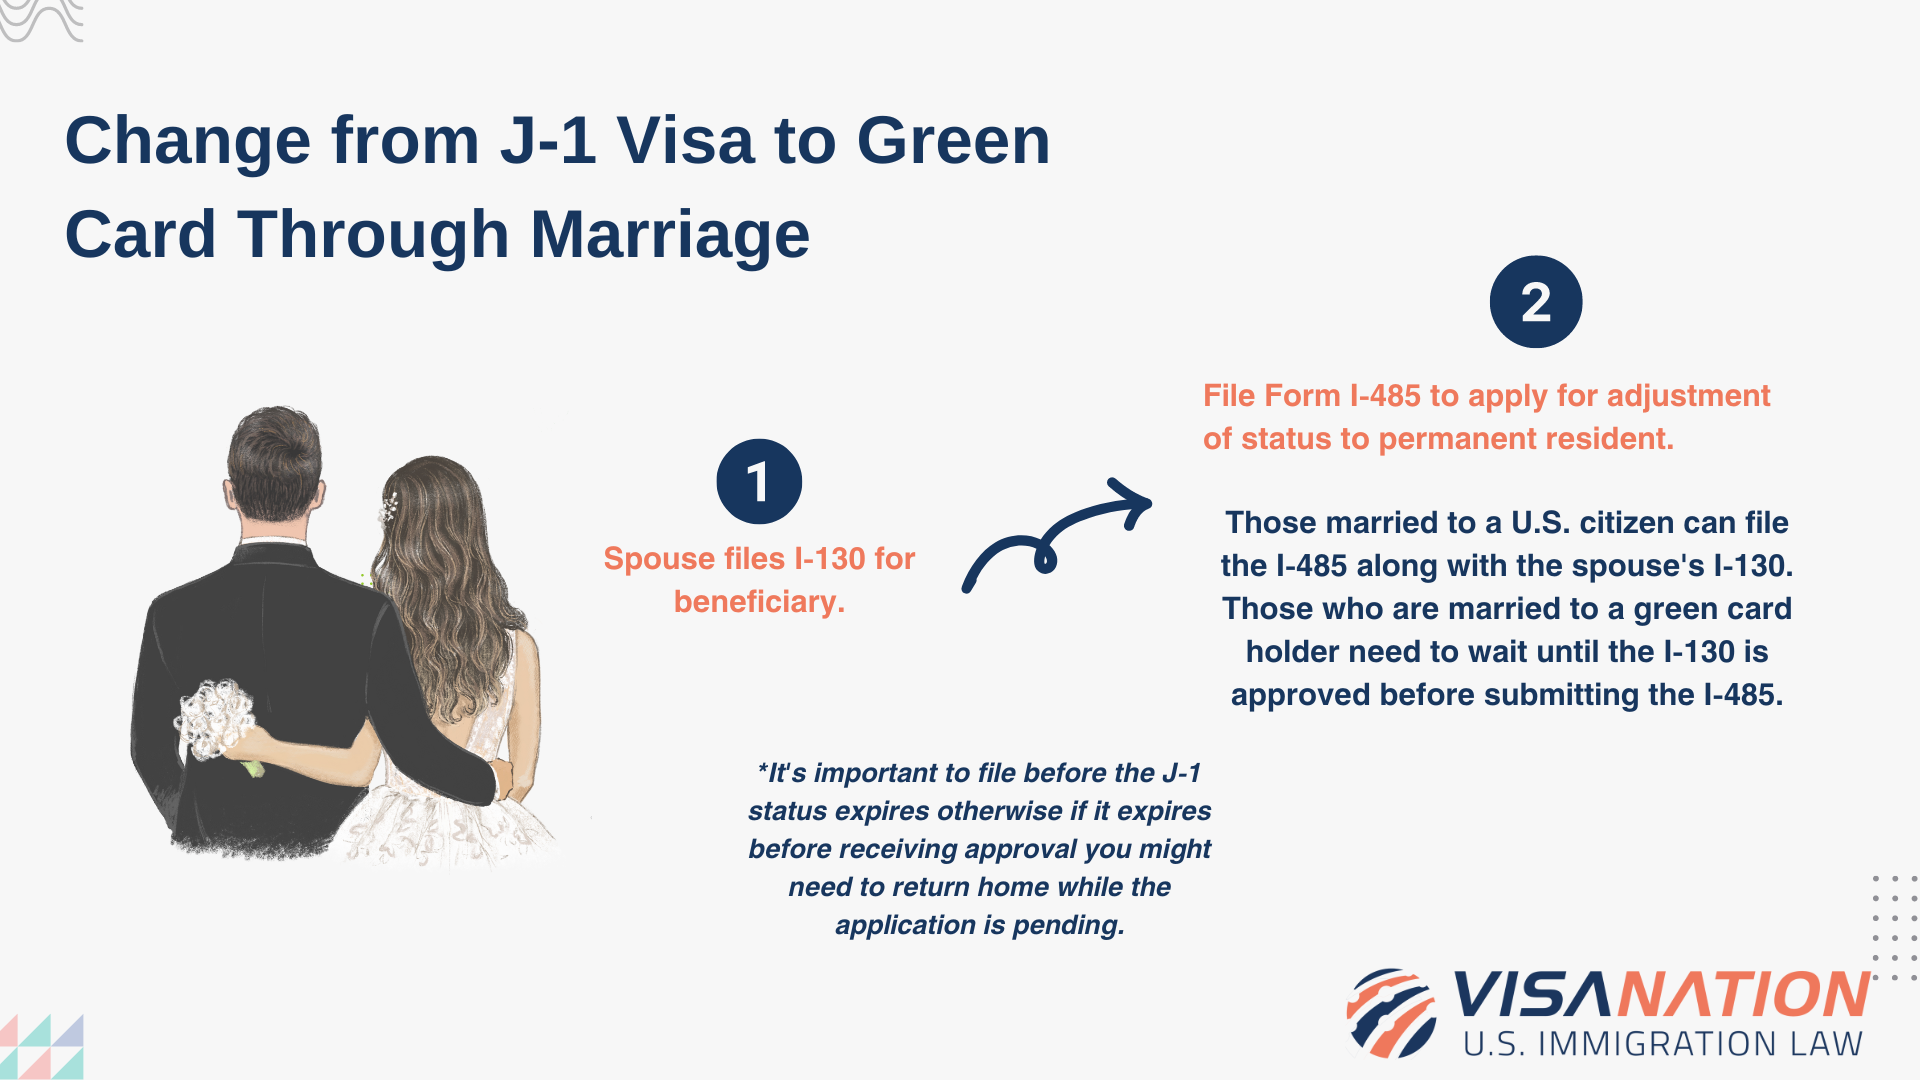 j1 visa to green card marriage